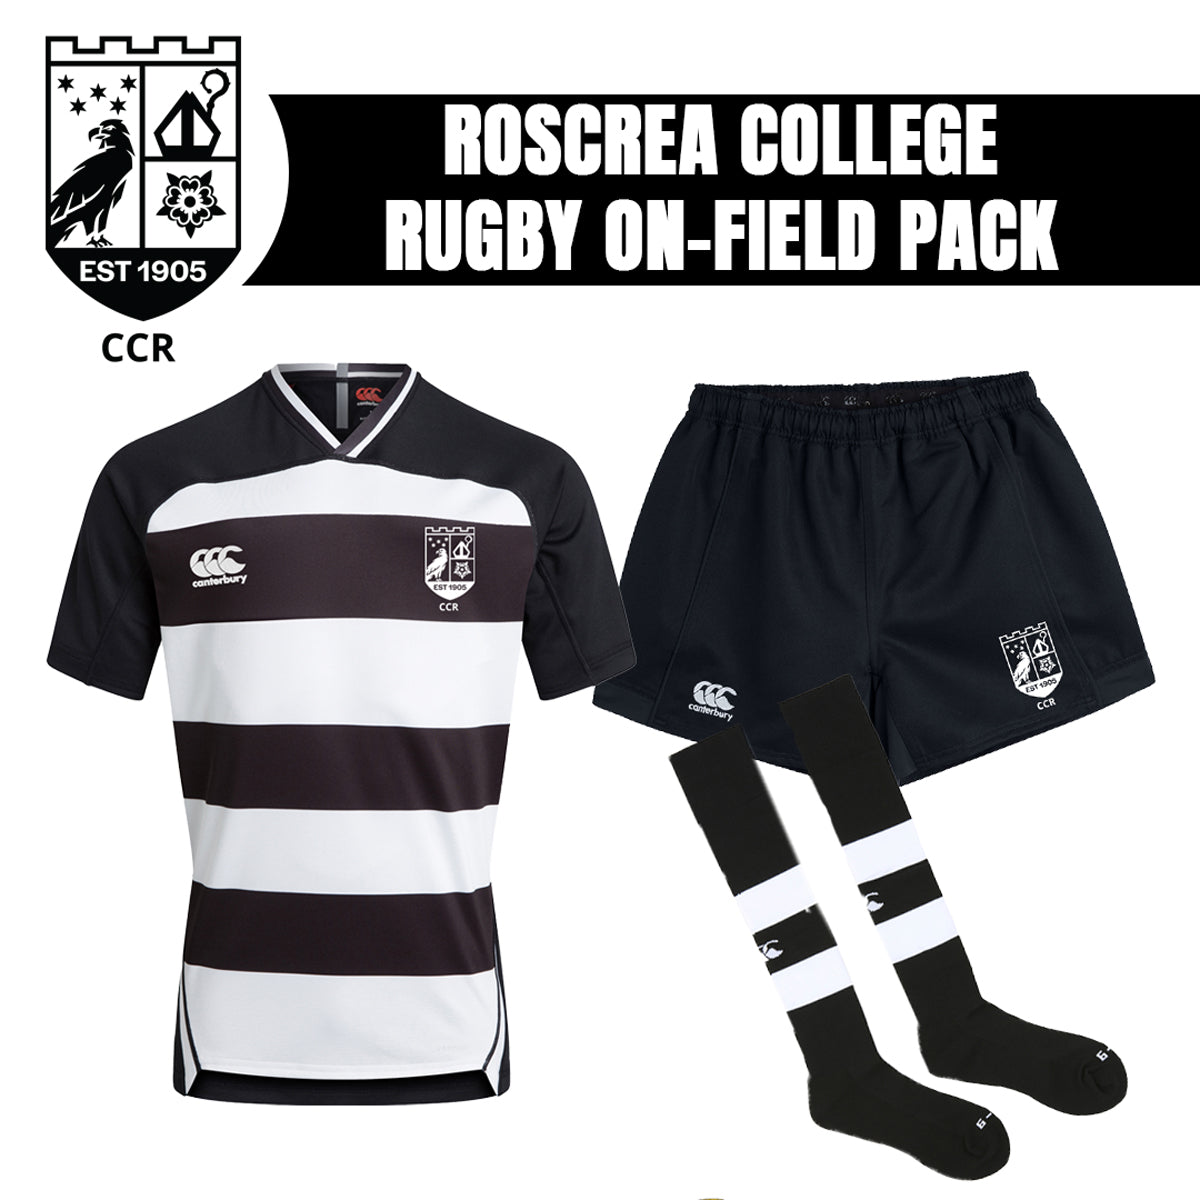 Roscrea College On-Field Rugby Pack